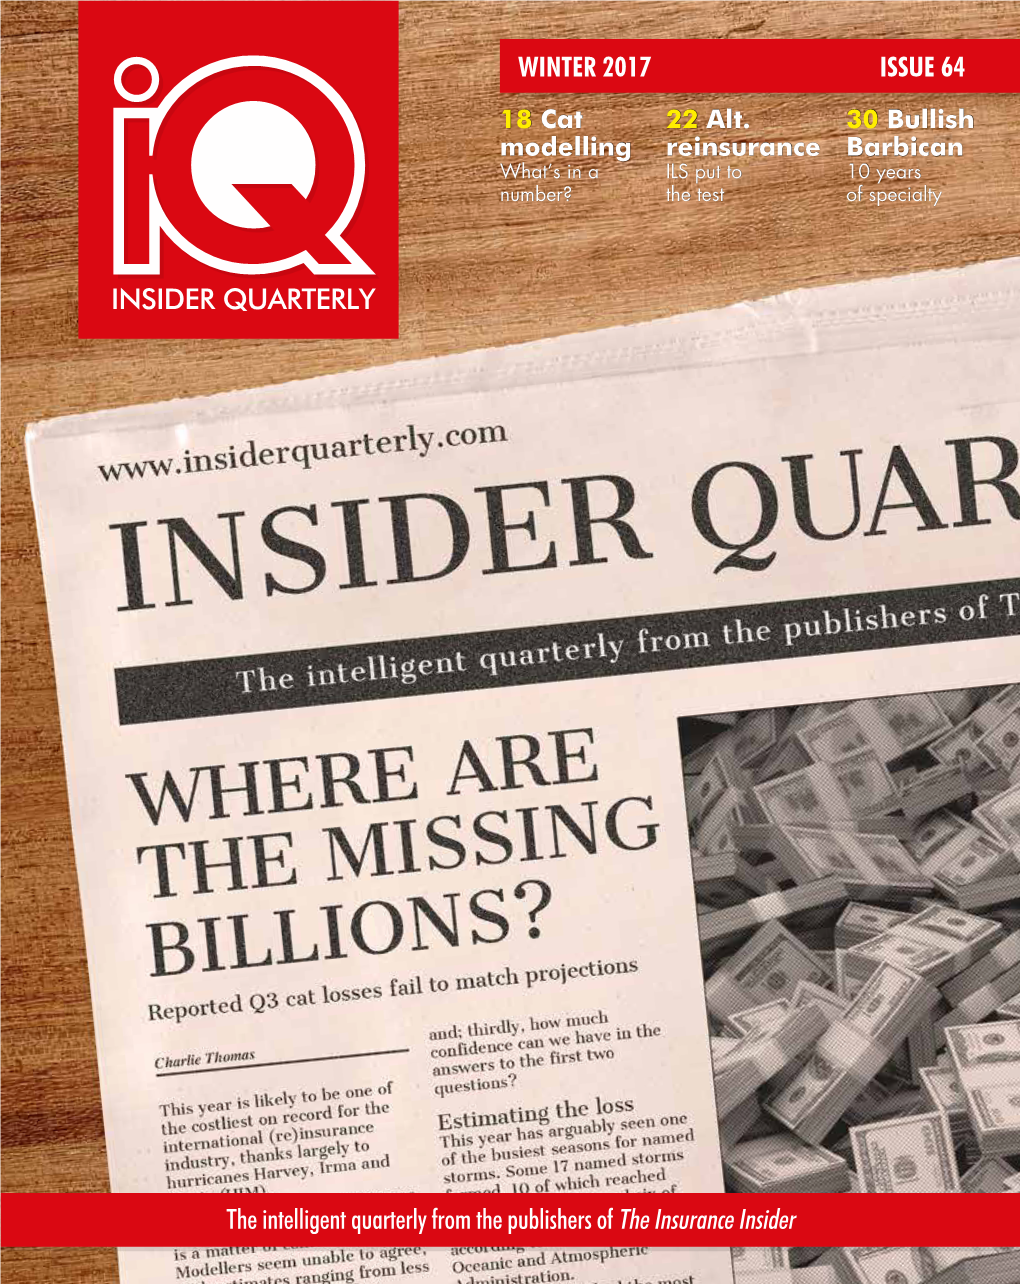 WINTER 2017 ISSUE 64 the Intelligent Quarterly from The